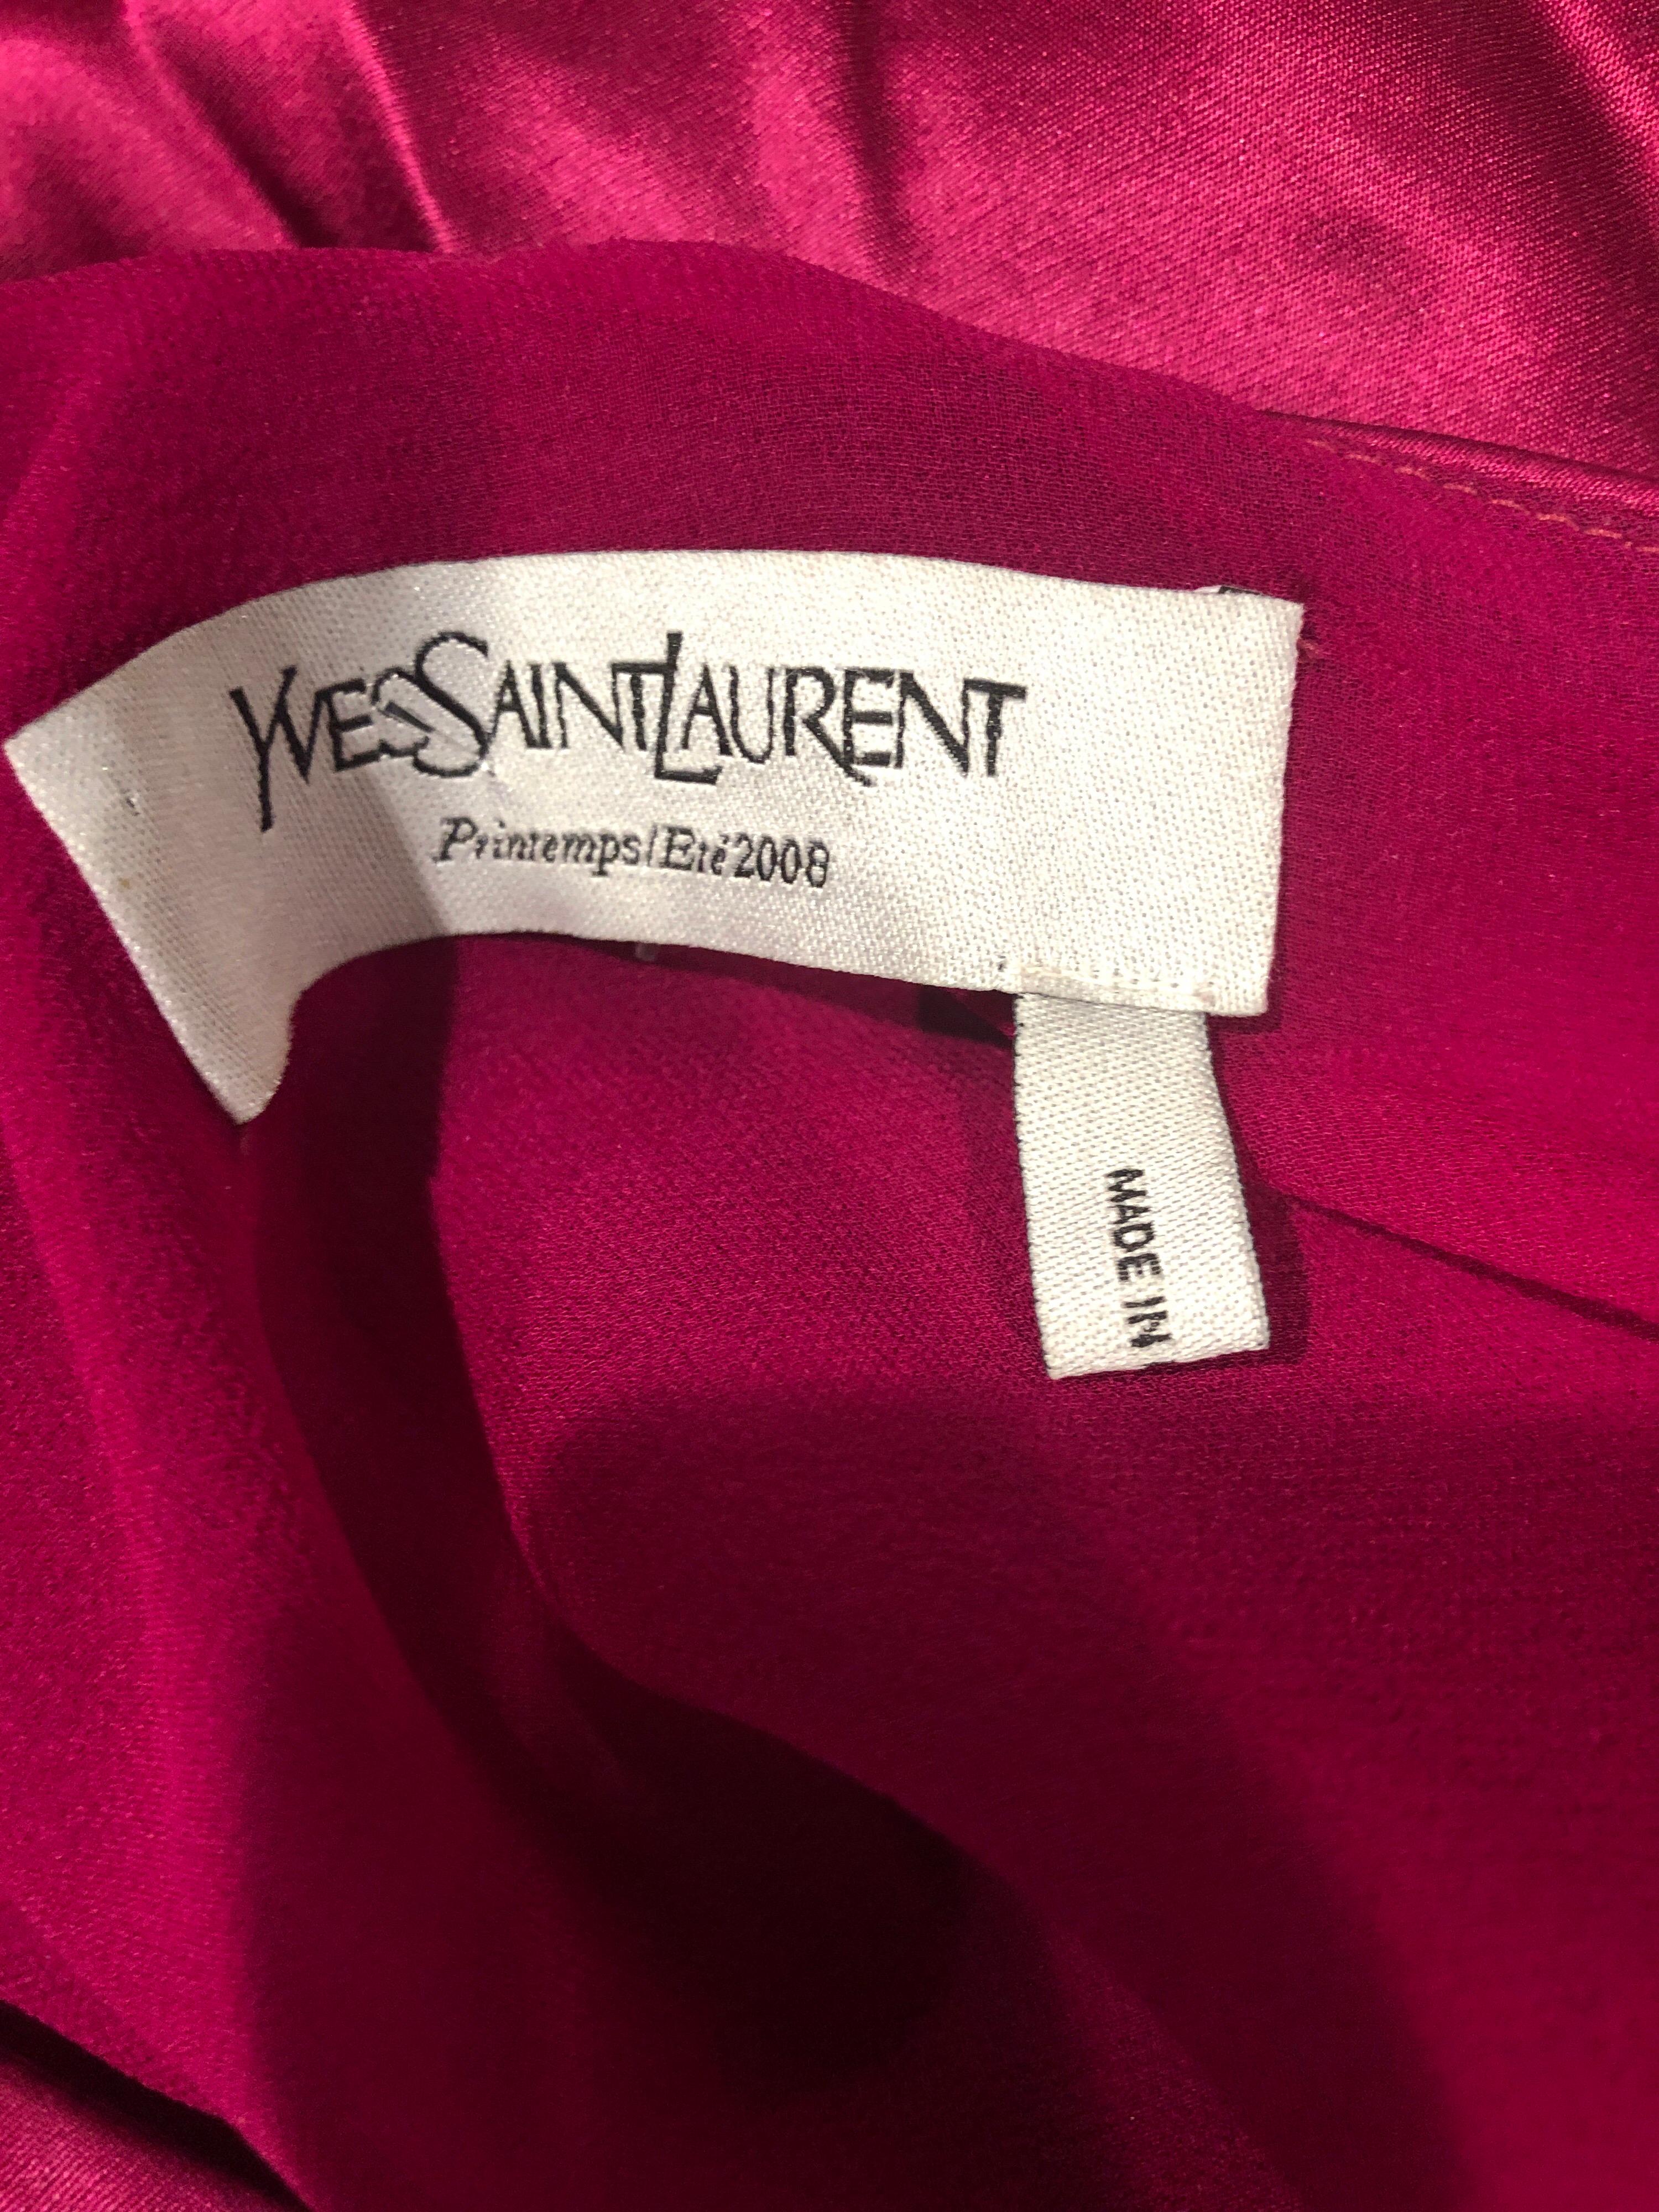 Yves Saint Laurent SS 2008 Kate Moss Sz 40 / 8 One Shoulder Silk Rasperry Gown For Sale 10